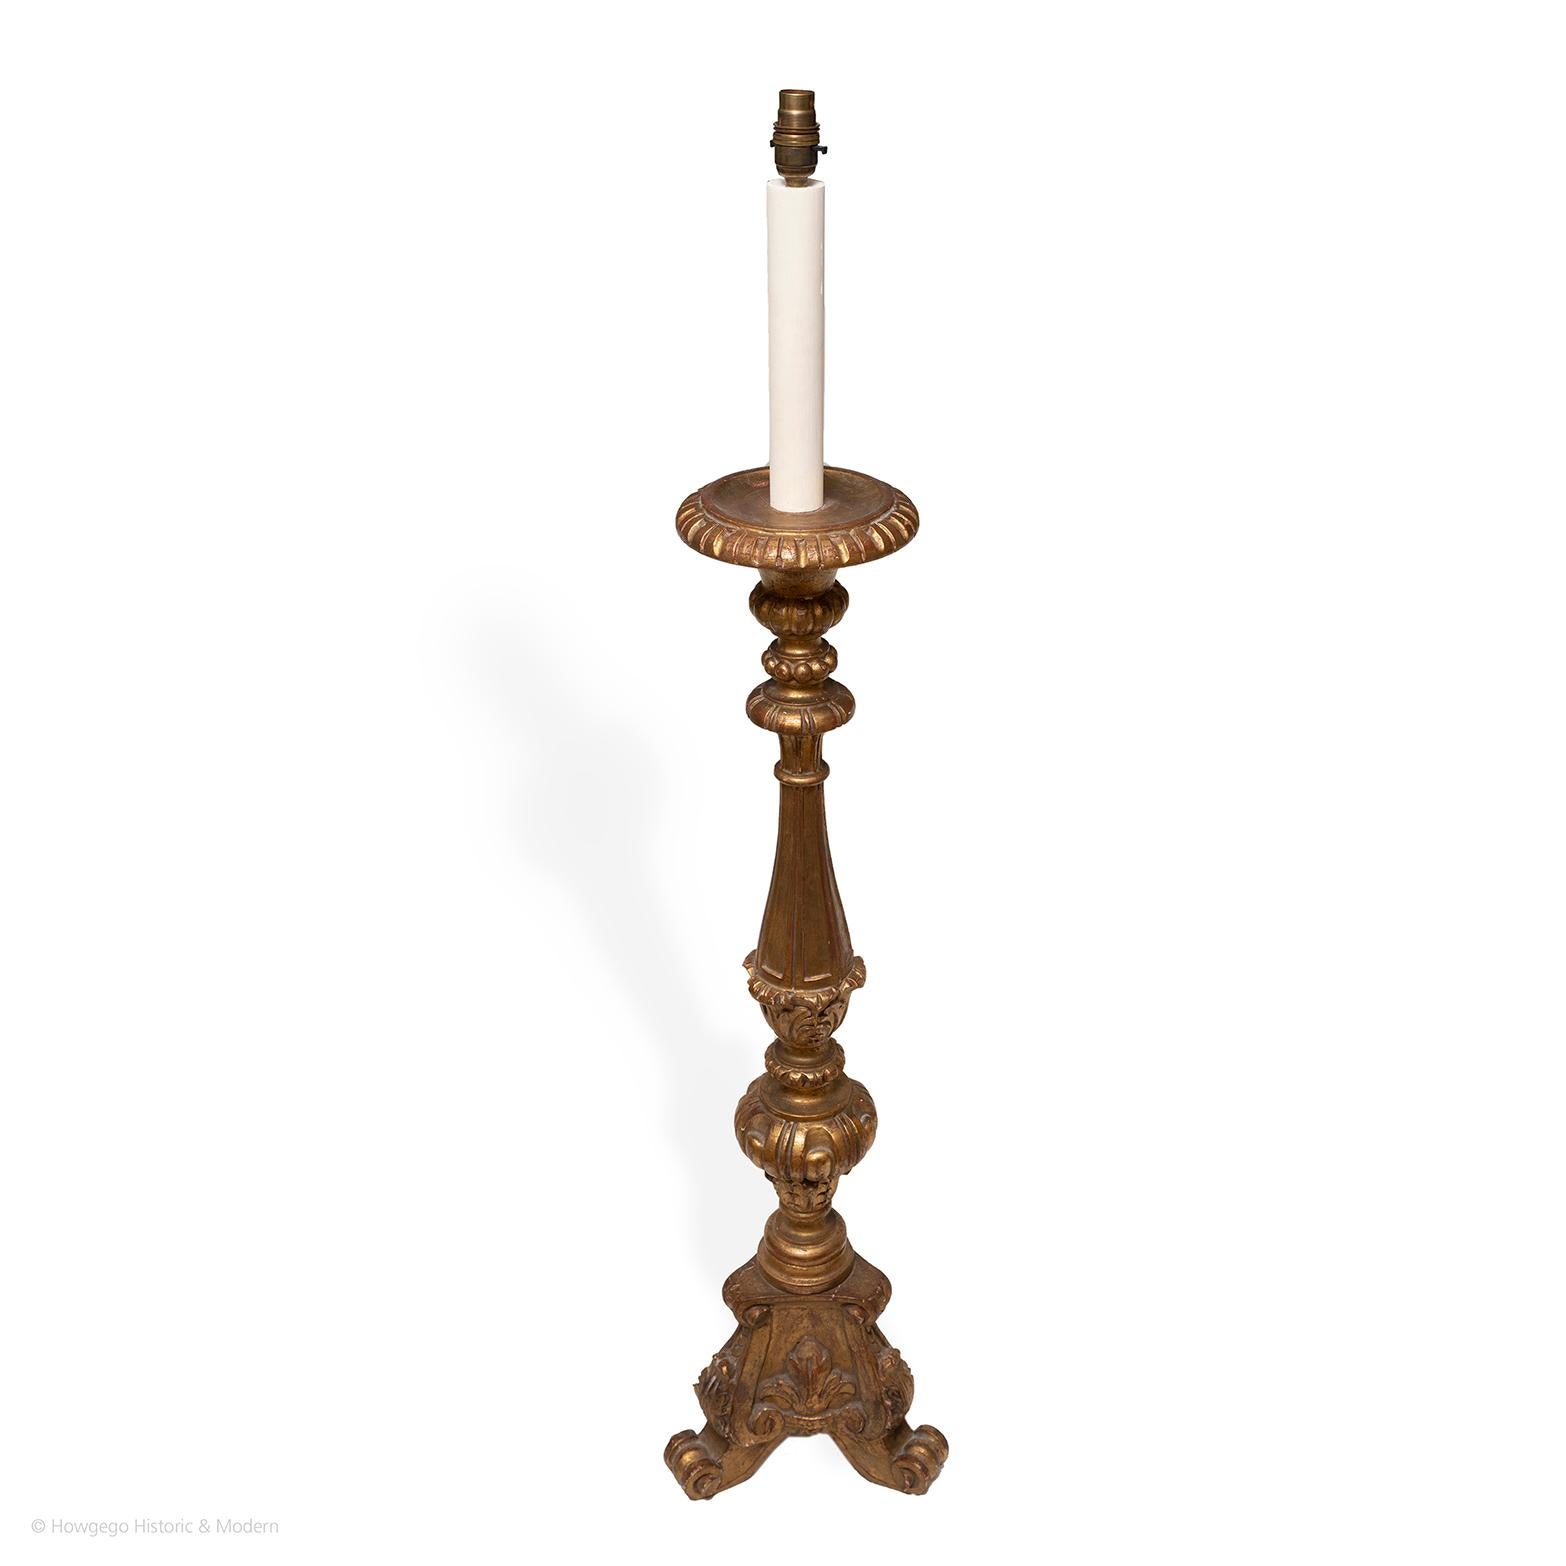 Fine, 19th century, italian, carved & gilded pricket torchere upcycled into a floor standing lamp.
Finely carved with classical turnings and ornamentation, the gilding burnished to enhance the reflection of candlelight 
Injects classical gravitas